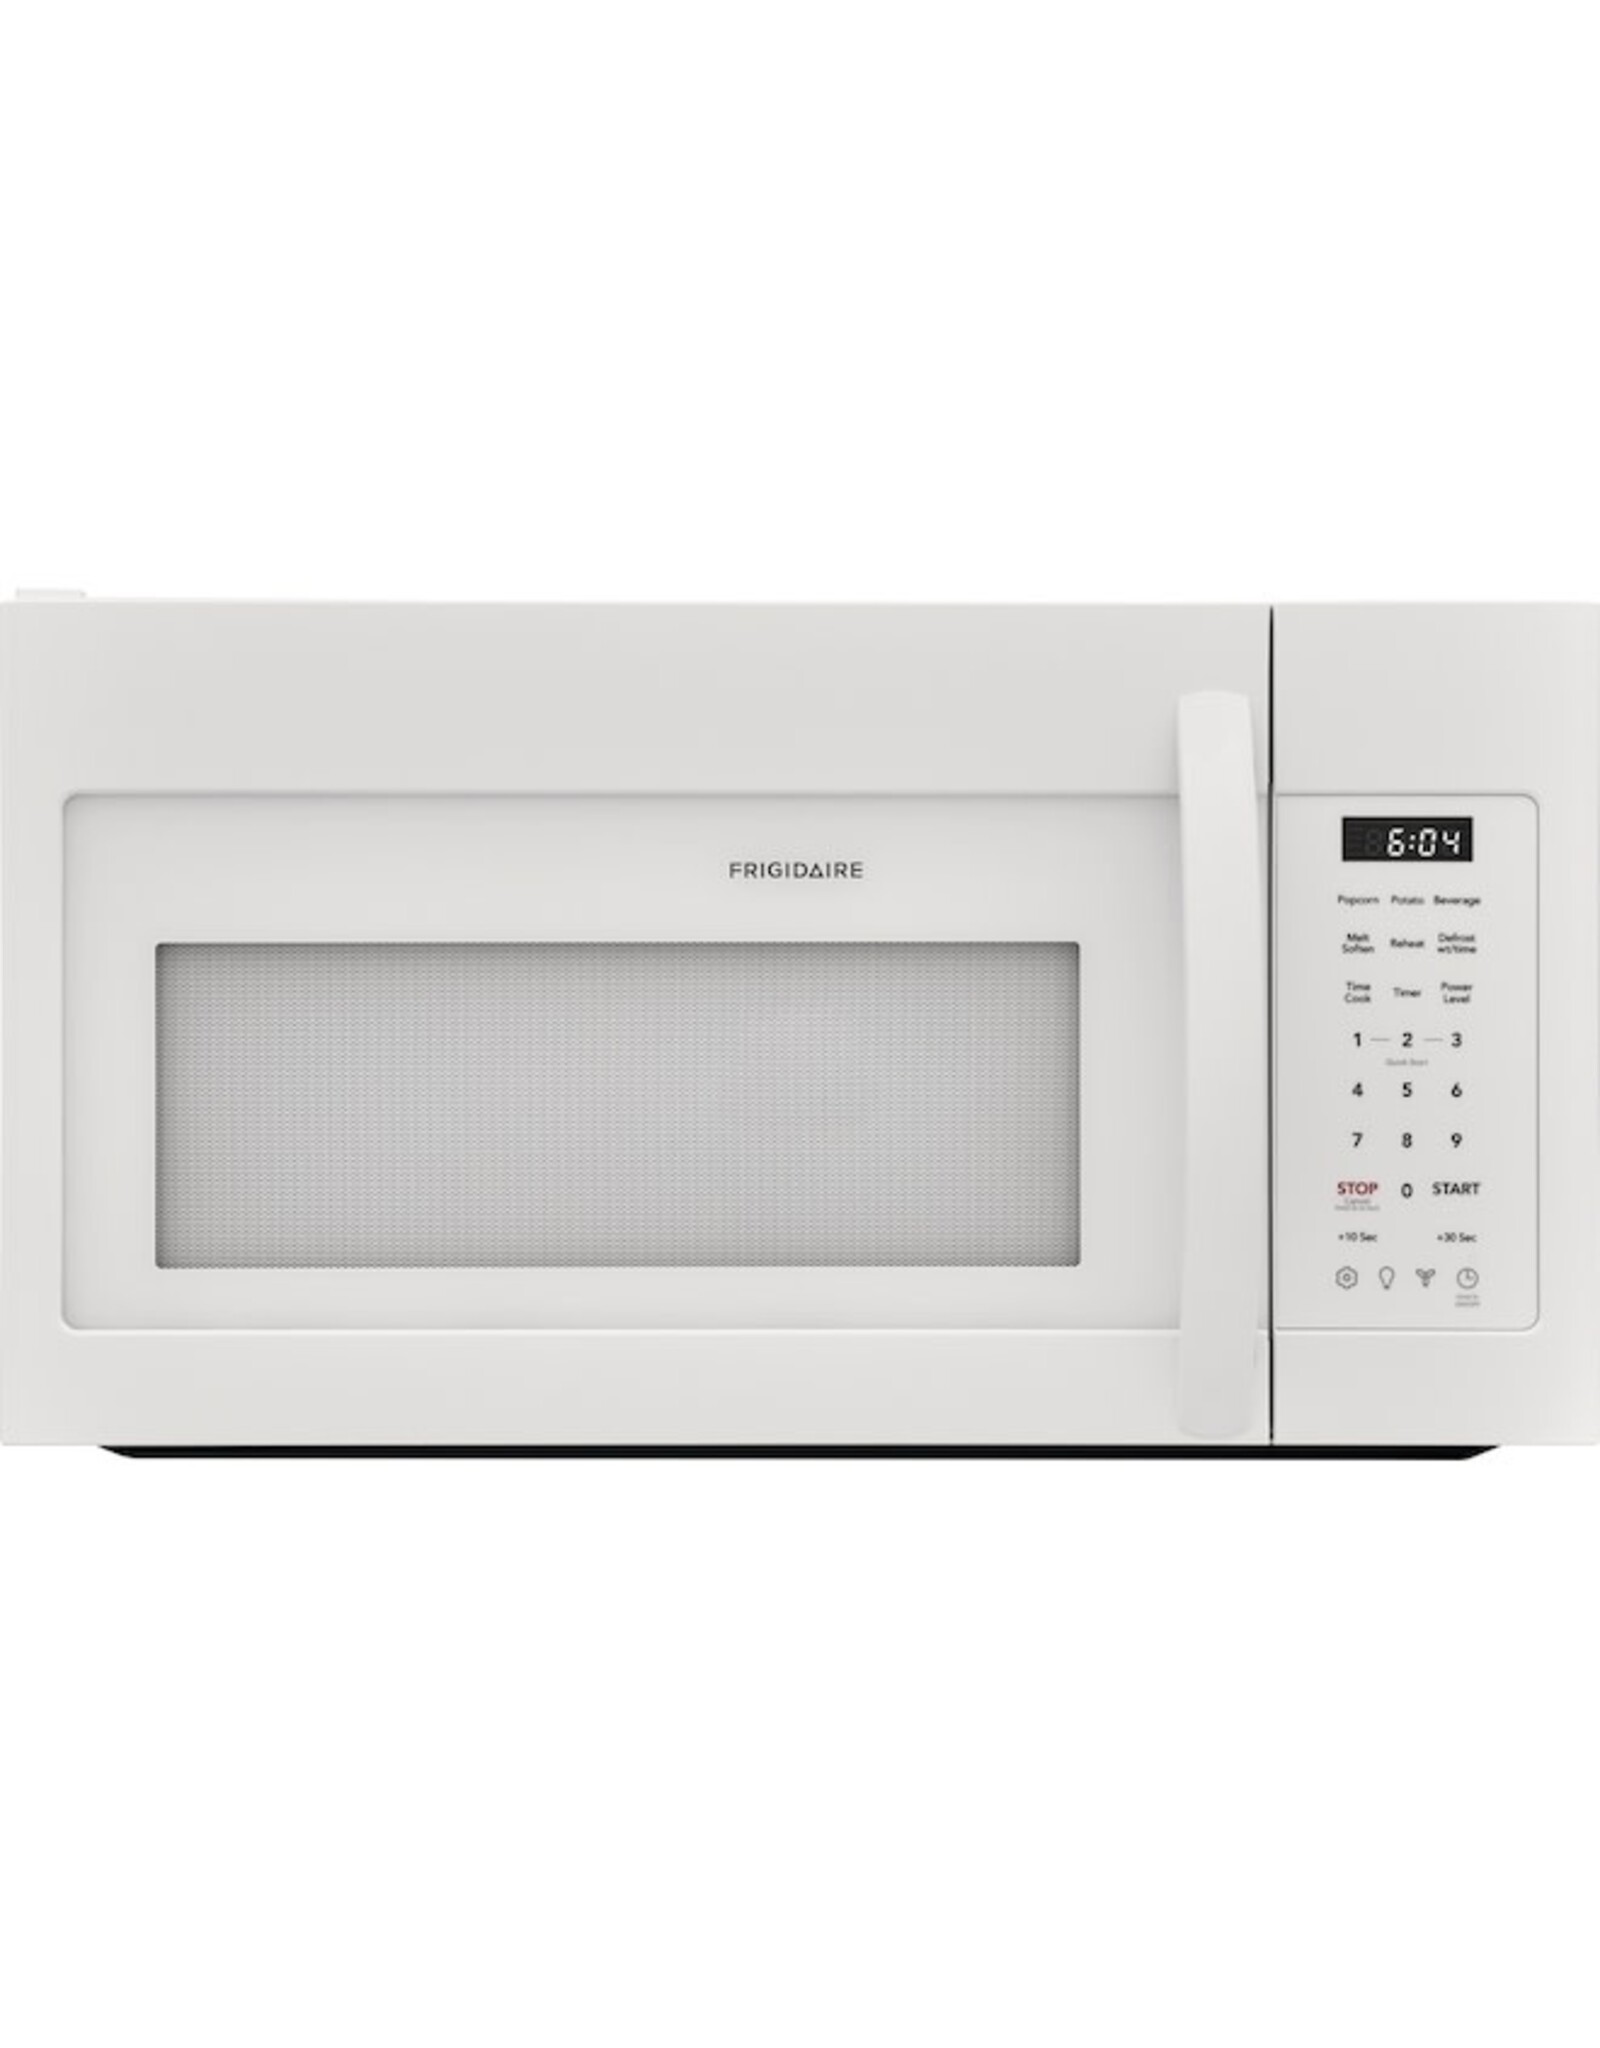 FRIGIDAIRE FMOS1846BW  30 in Width 1.8 cu. ft. 1000 Watt Over the Range Microwave with Charcoal Filter 300 CFM in White